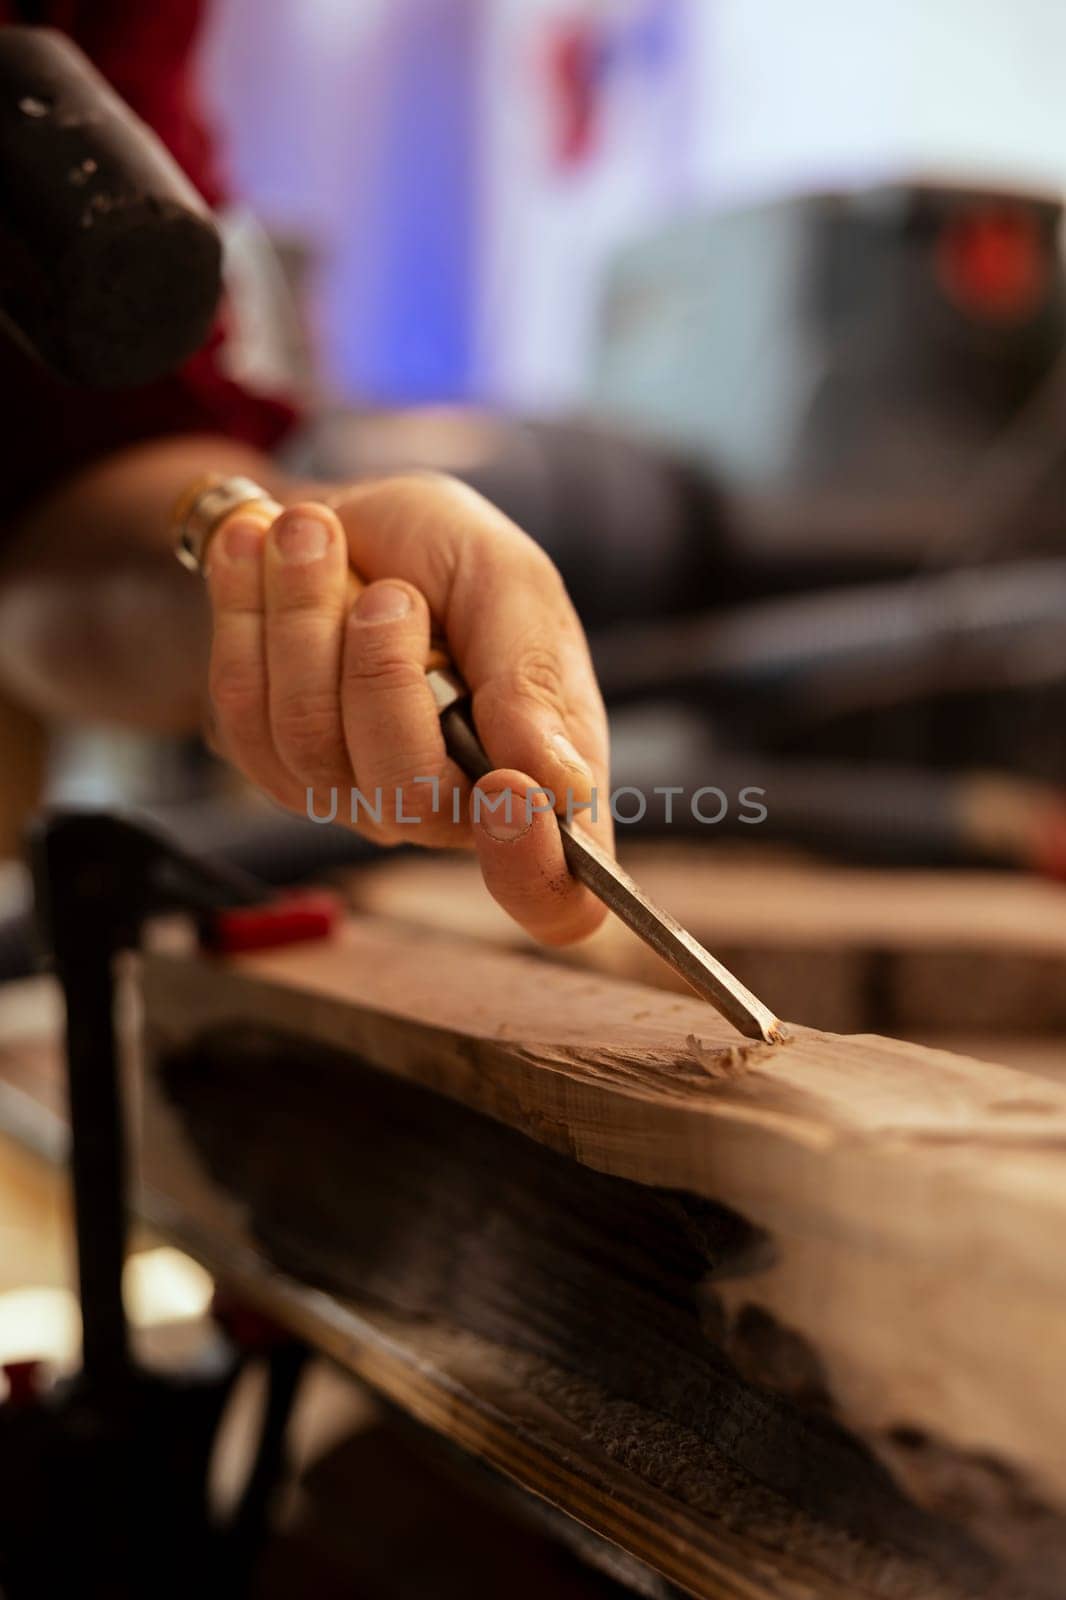 Carpenter in woodworking workshop shaping wooden pieces with tools, close up by DCStudio